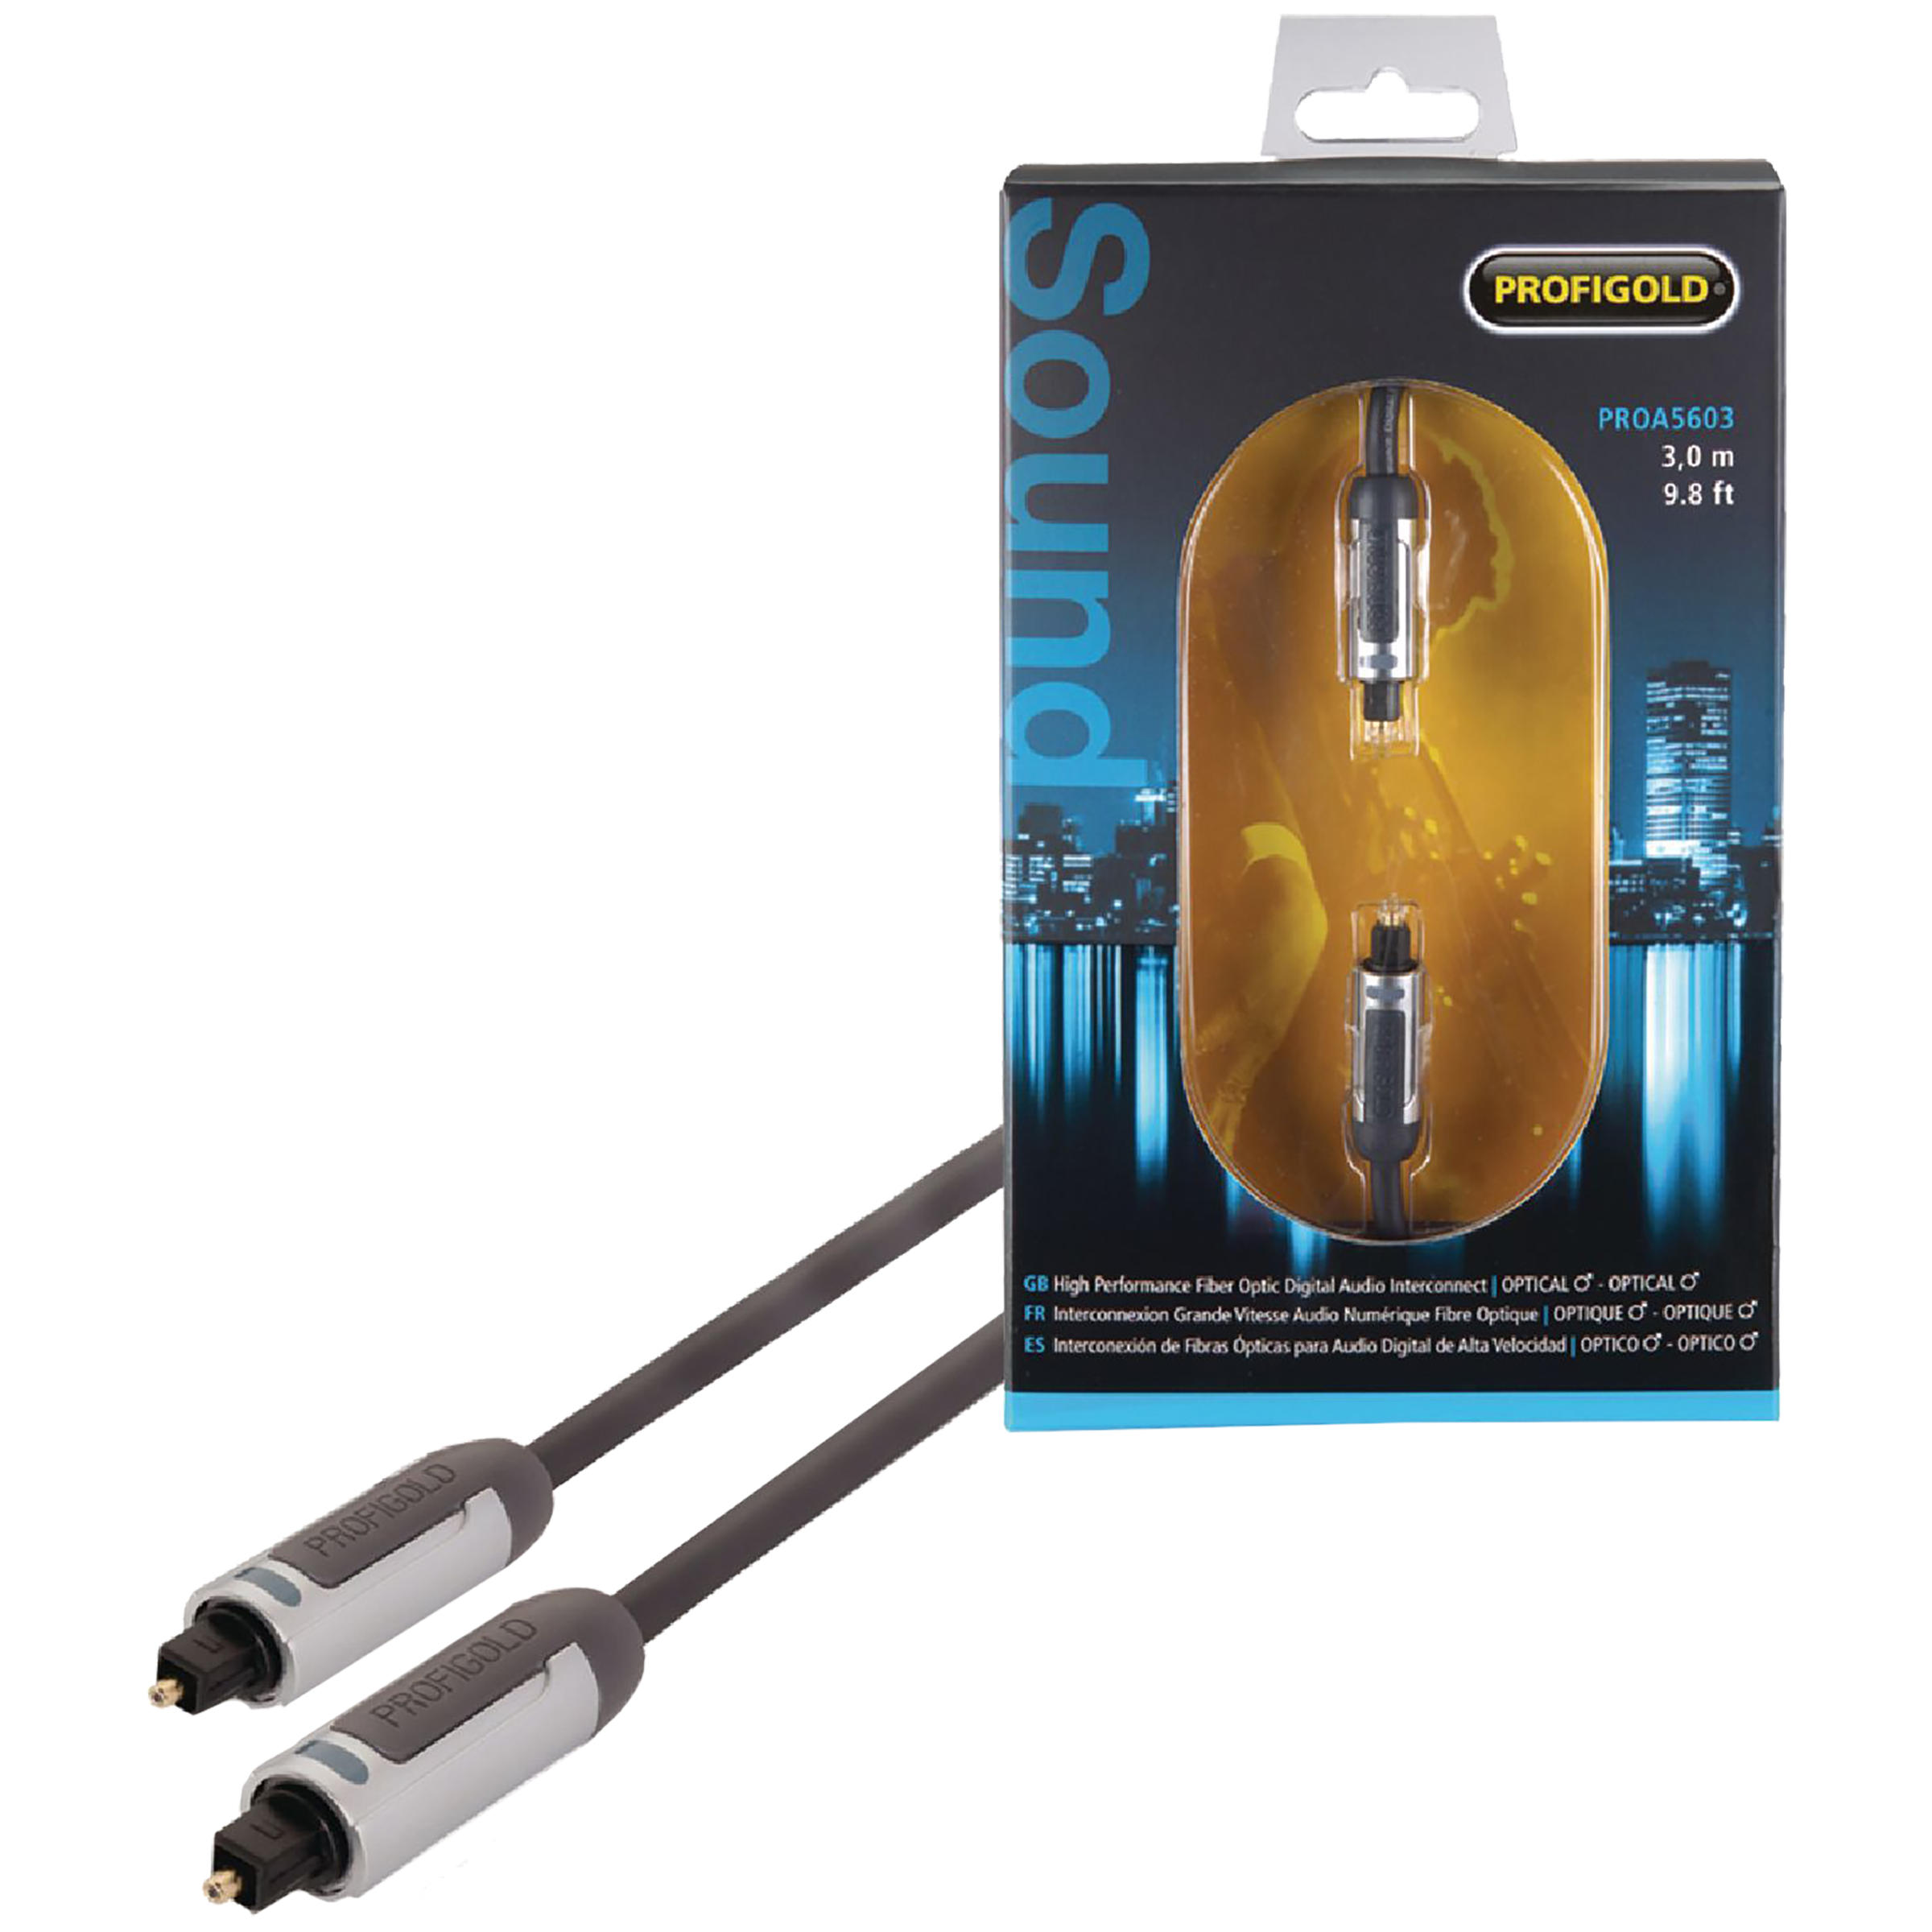 Profigold PROA5603 PVC 3 Meter TosLink to TosLink Audio Cable (Optimised Optical Fibre, Anthracite)